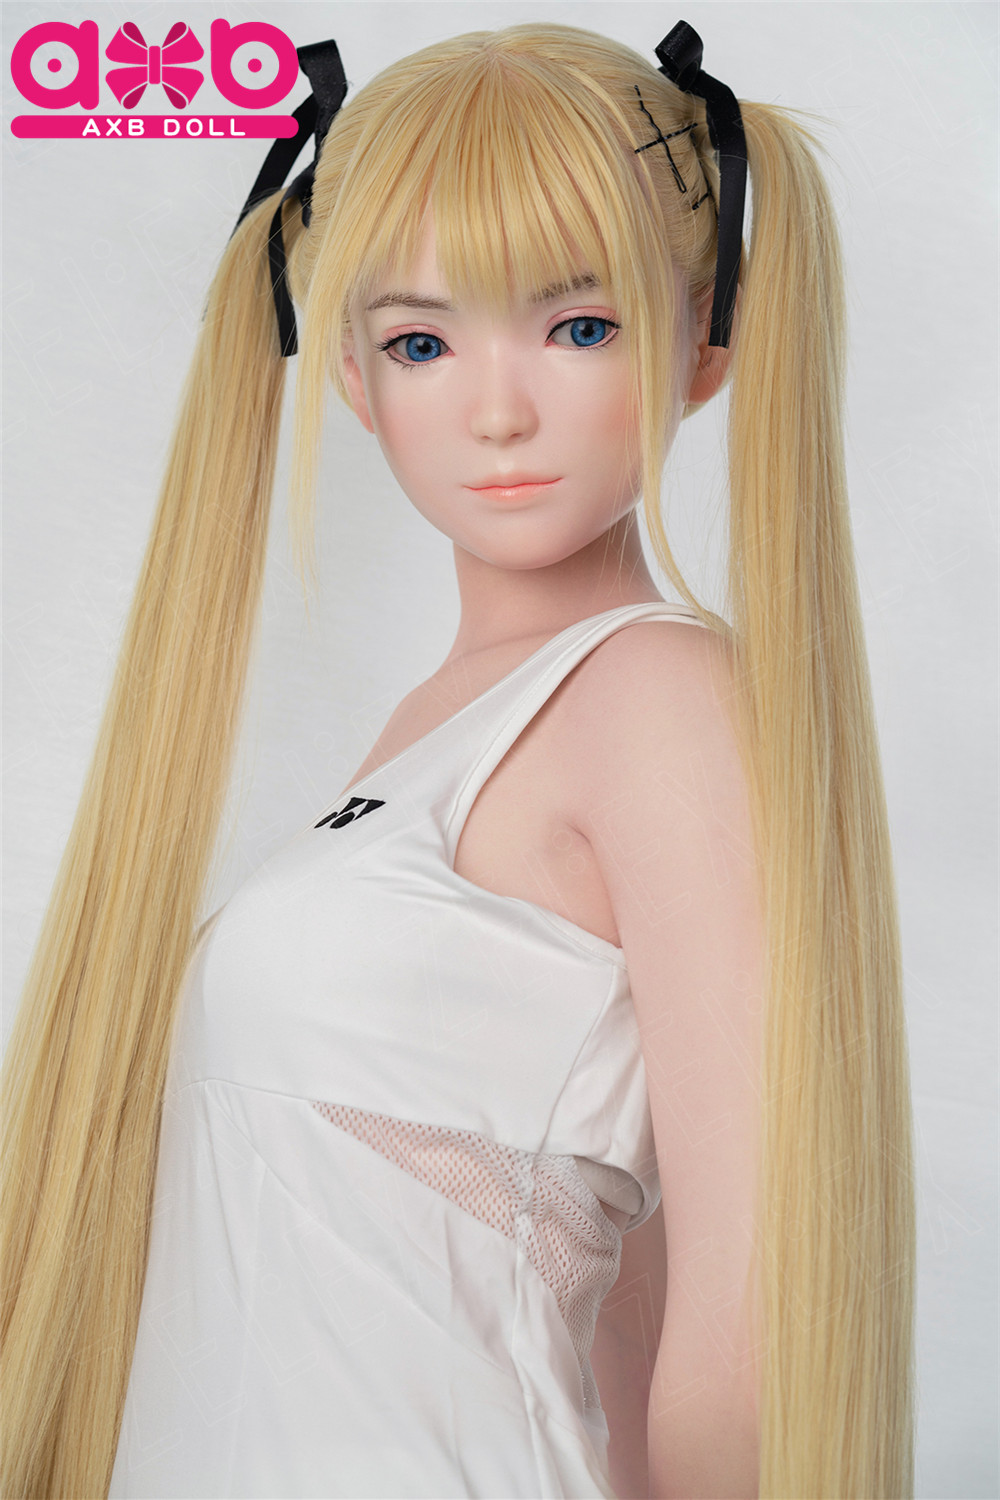 AXBDOLL 147cm Silicone Slight Defective Doll Head Can Choose - 画像をクリックして閉じます